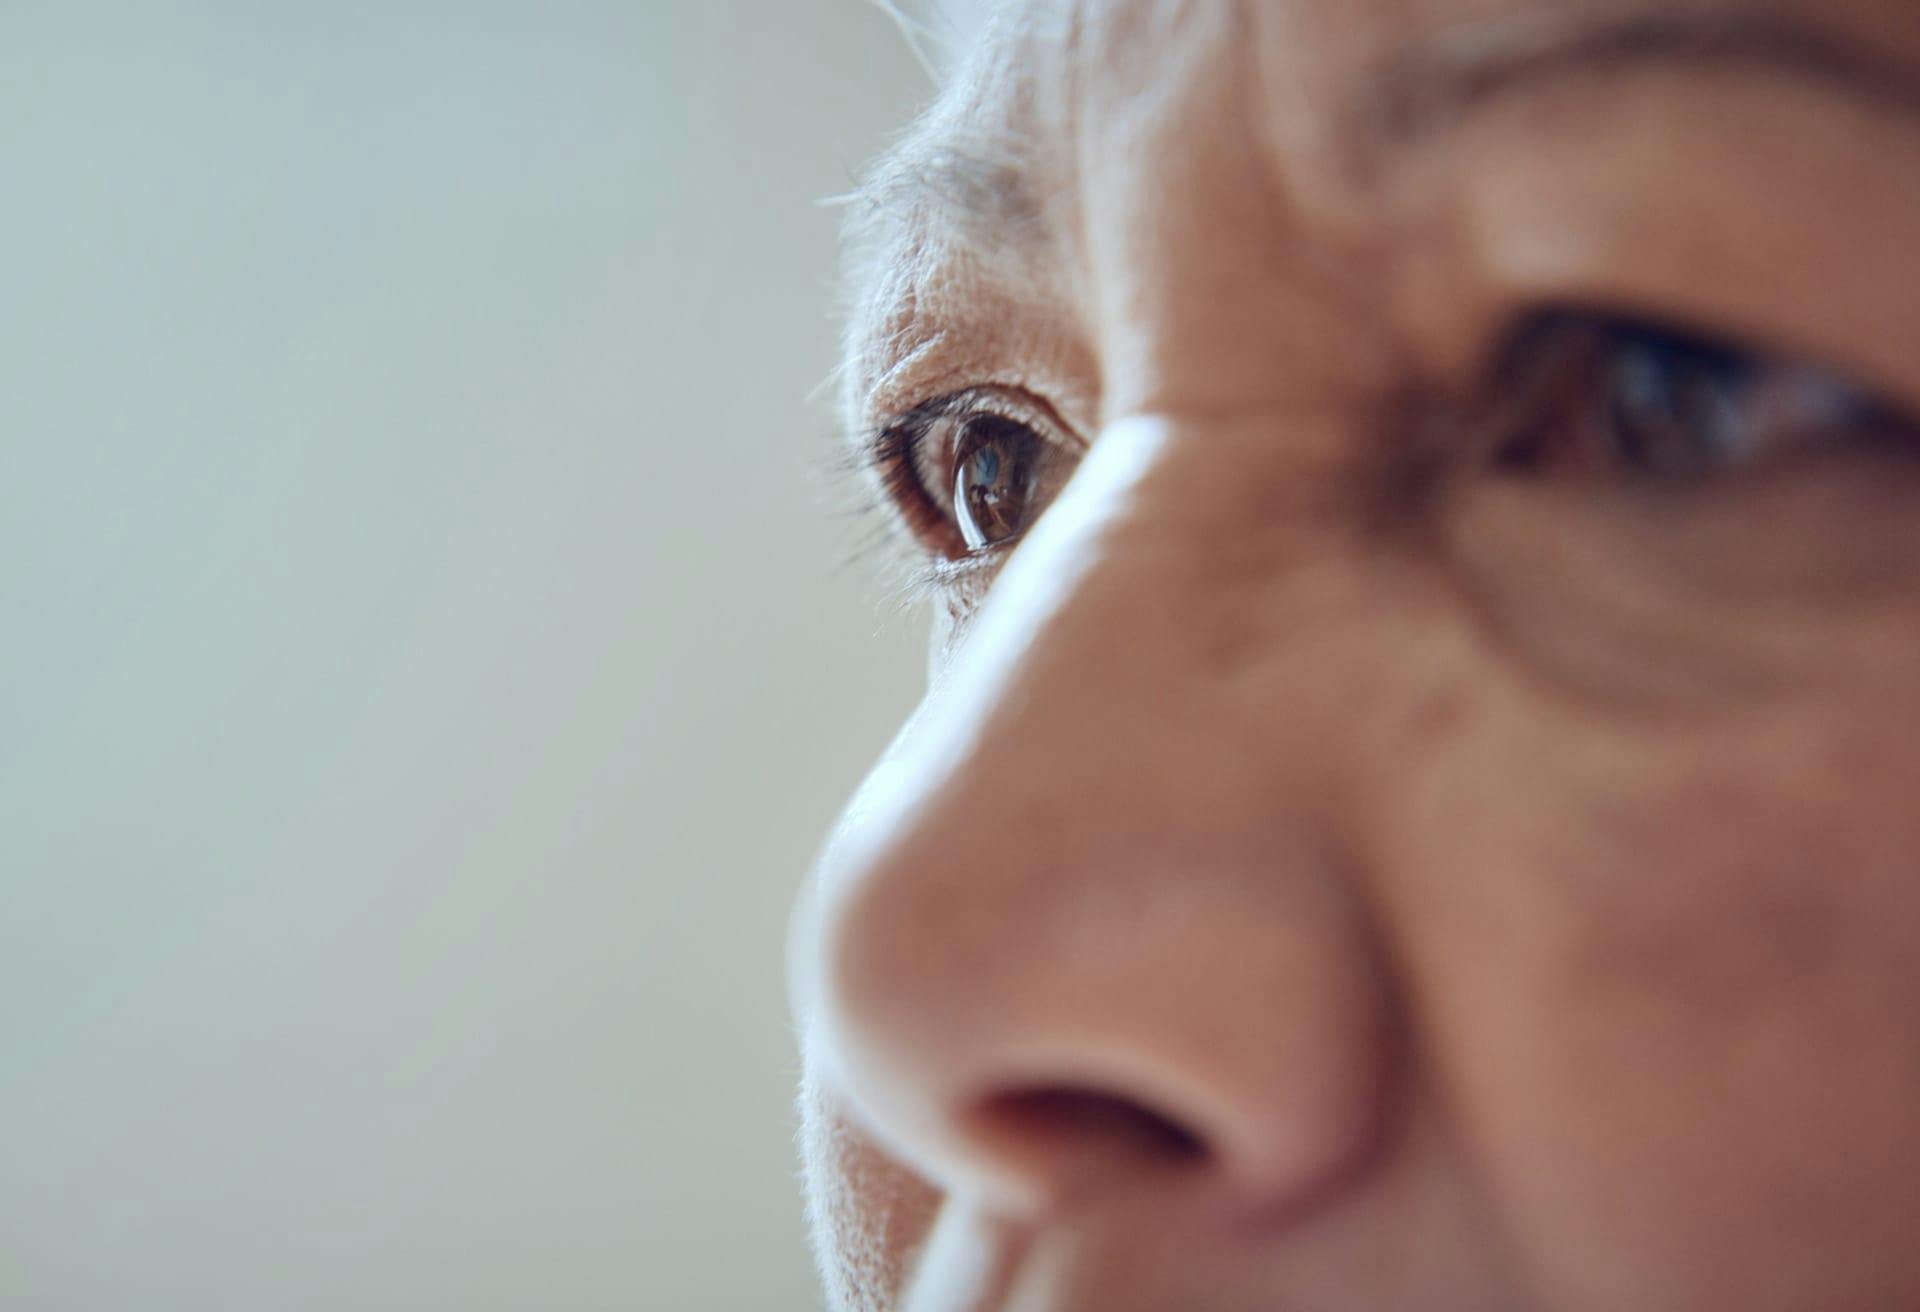 Close up image of older person's eyes and nose